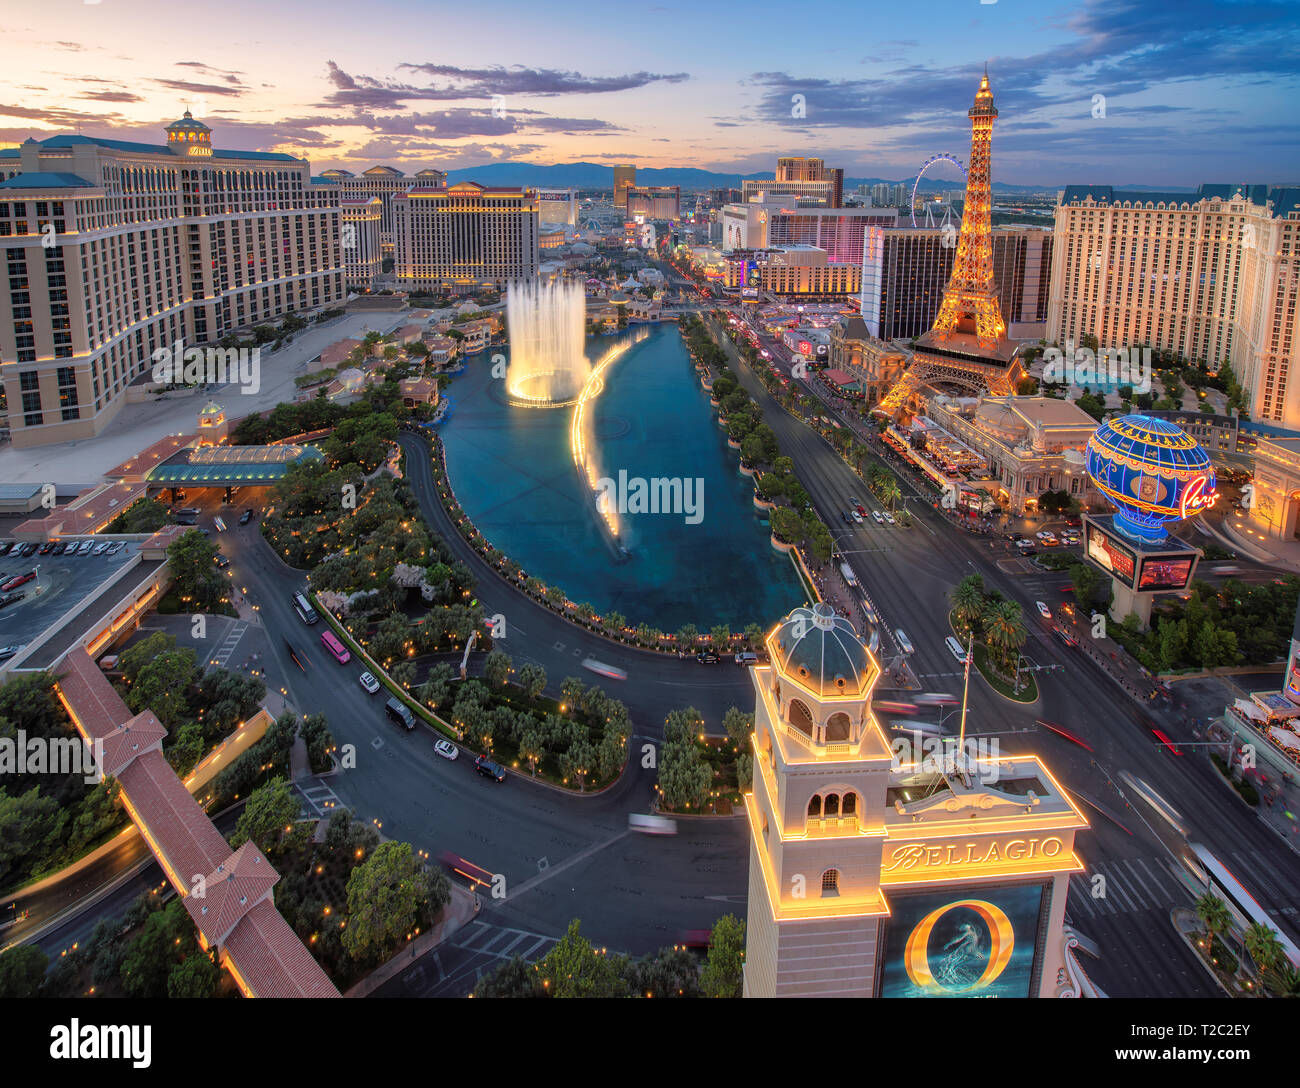 Panoramic view of World famous Las Vegas Strip at sunset Stock Photo